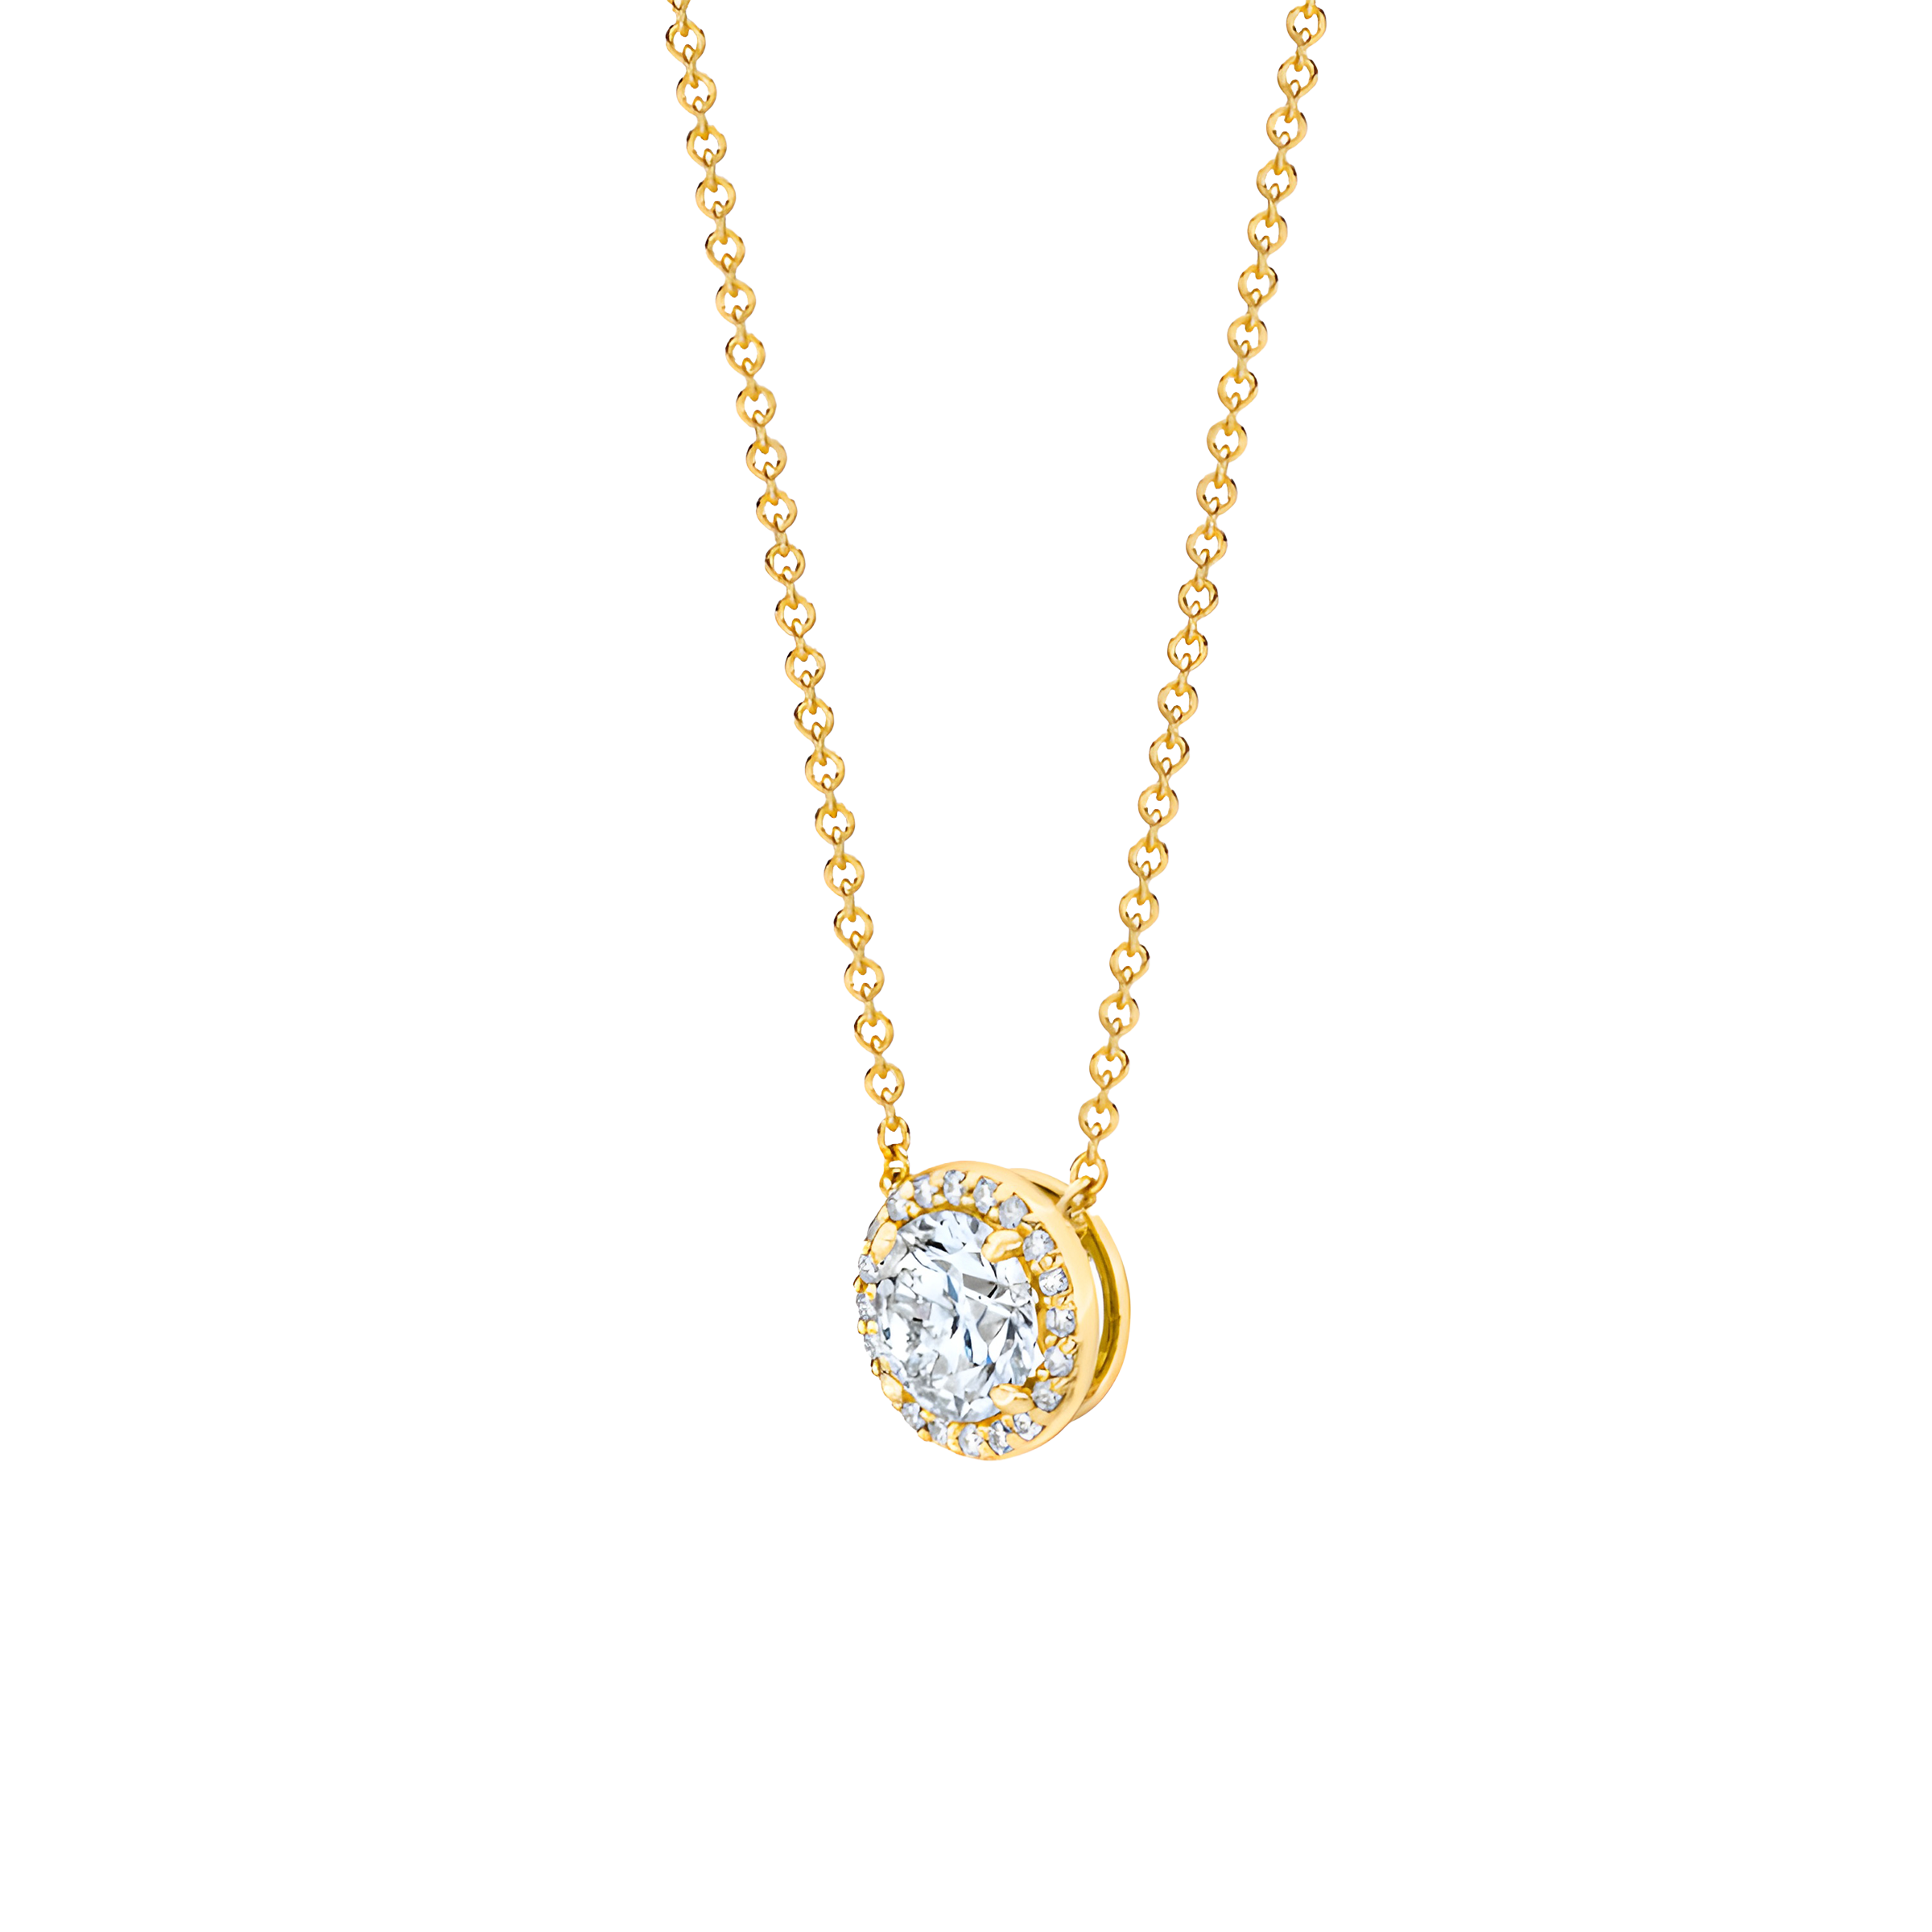 Round Brilliant Diamond Halo Pendent Necklace in 18k Yellow Gold